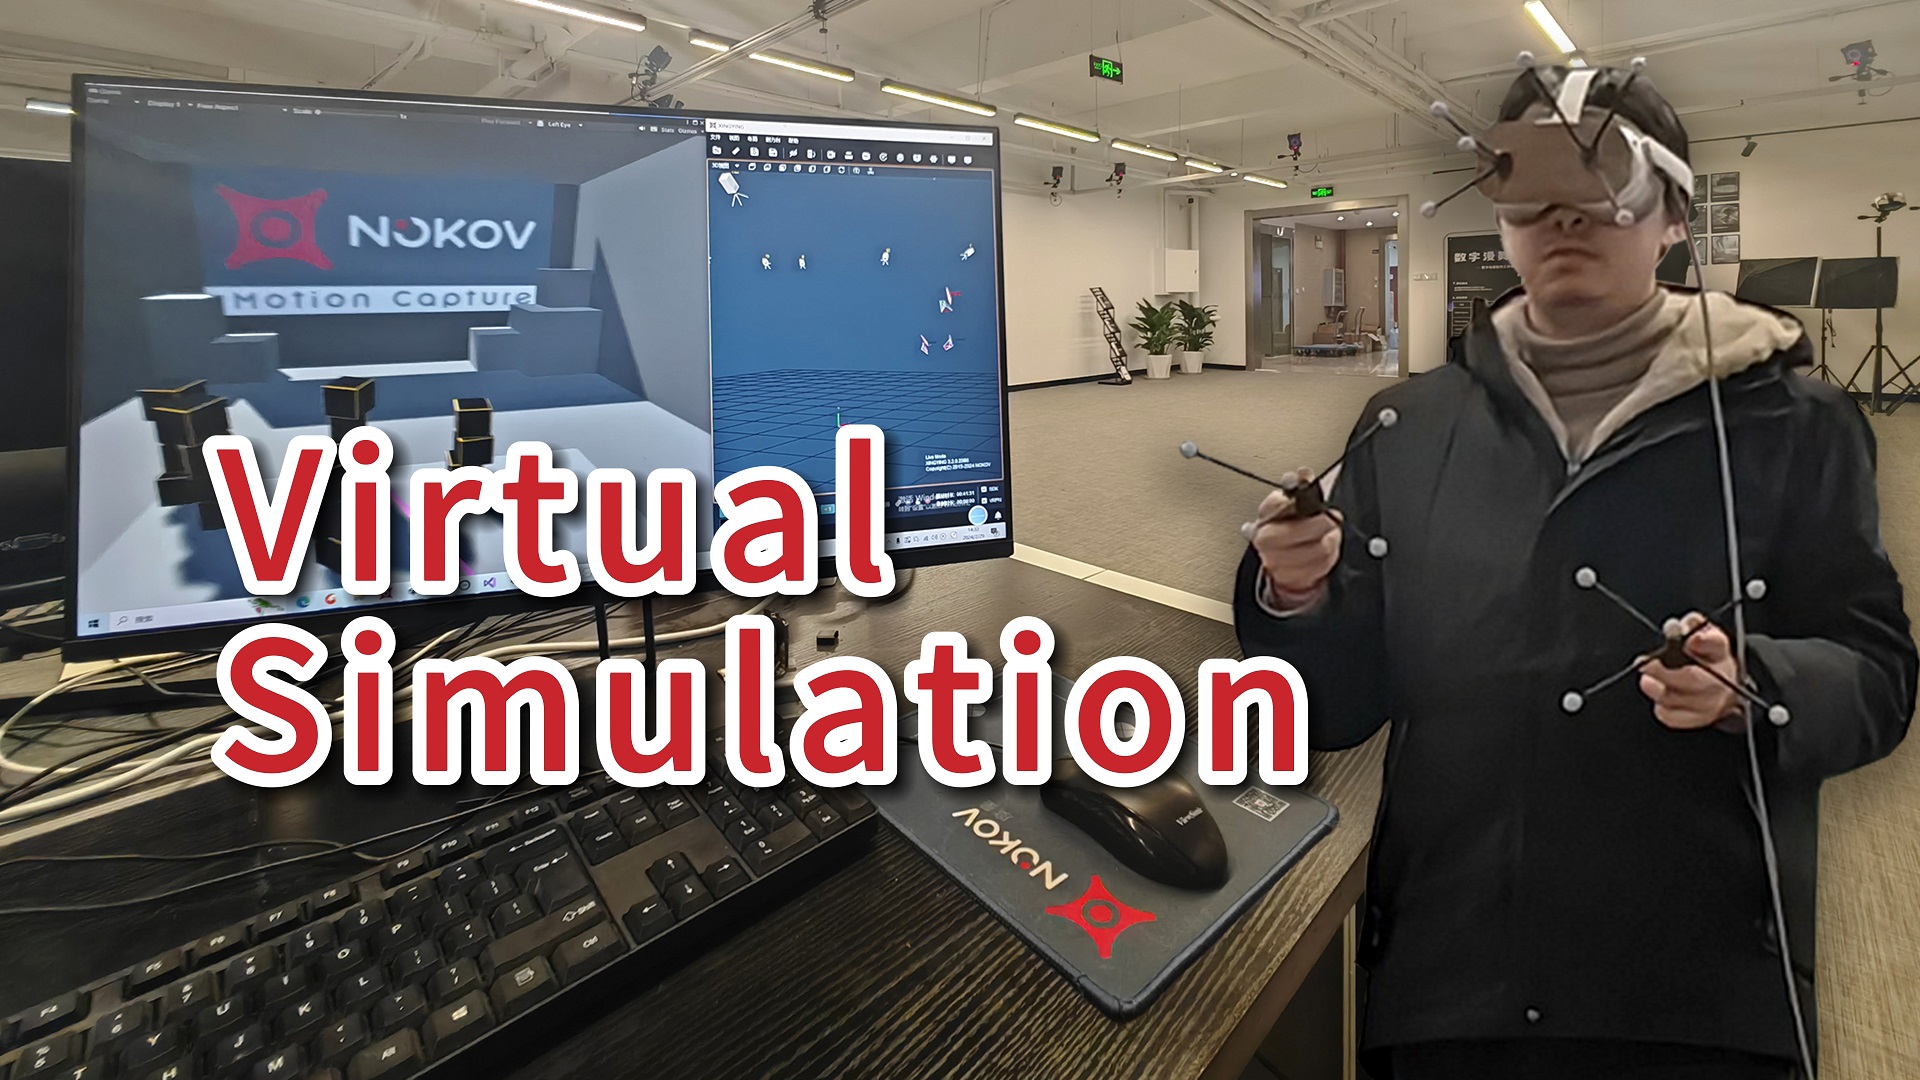 Motion Tracking Solution for Virtual Simulation